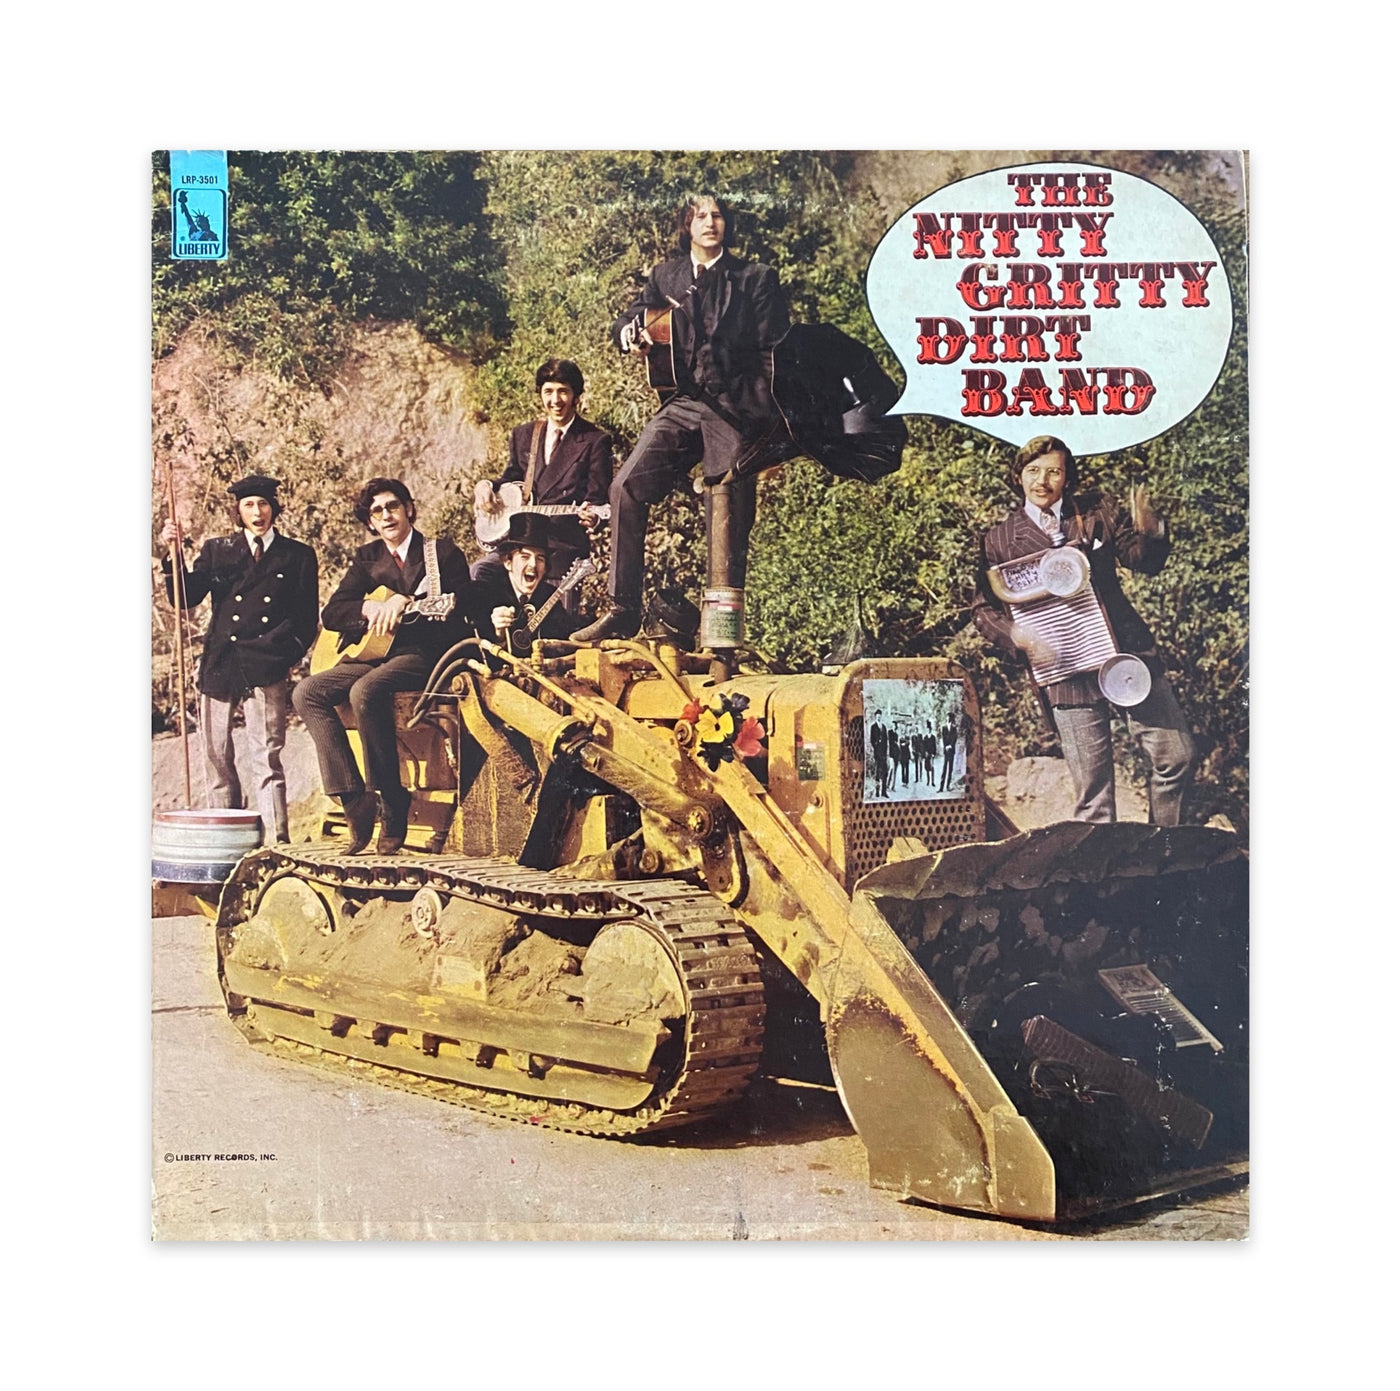 Nitty Gritty Dirt Band - The Nitty Gritty Dirt Band